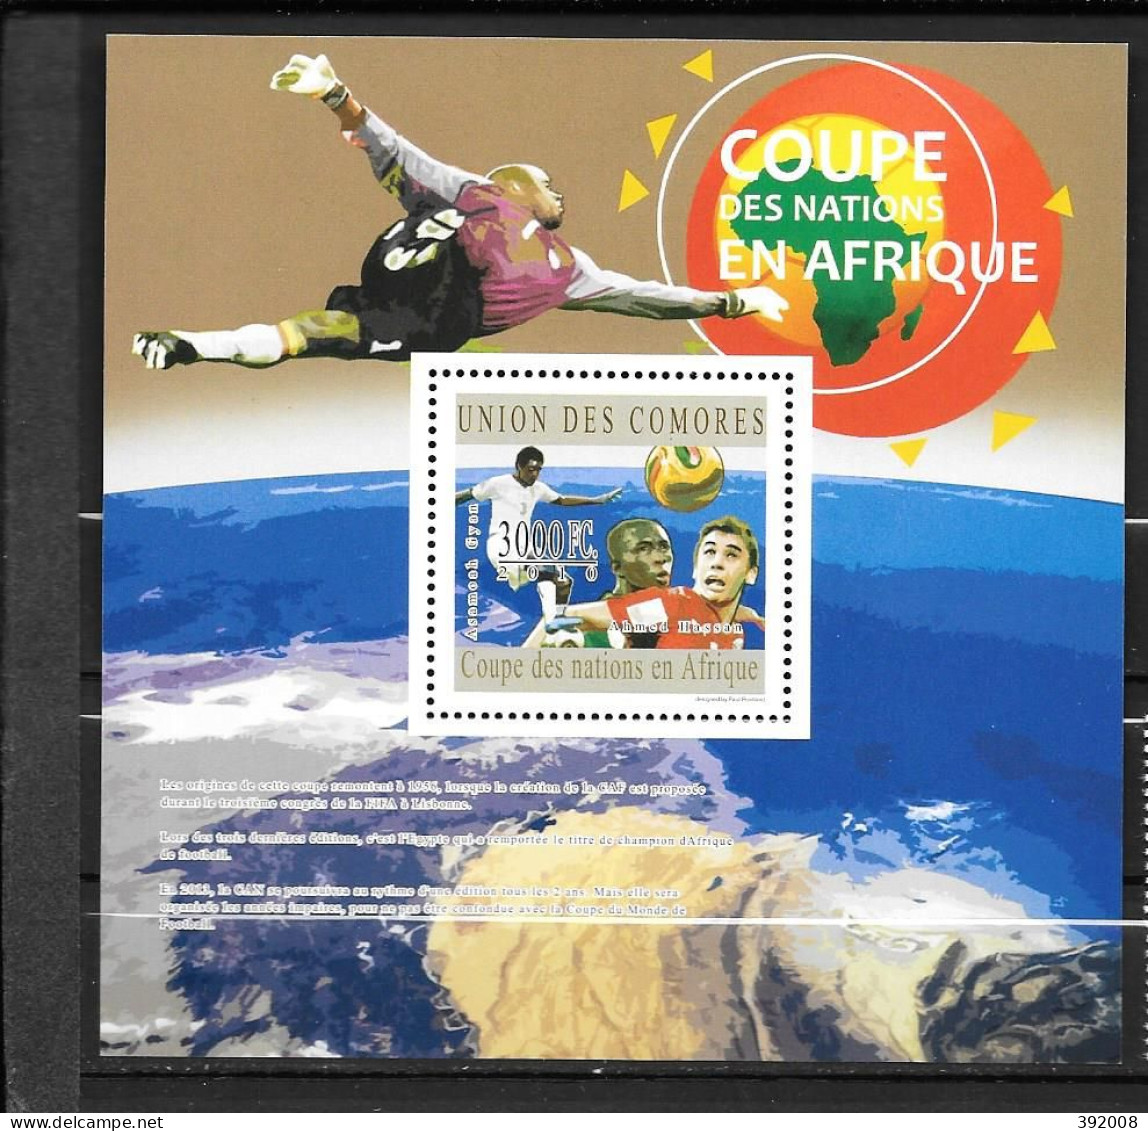 CAN 2010 - COMORES - BF 270 **MNH - Africa Cup Of Nations